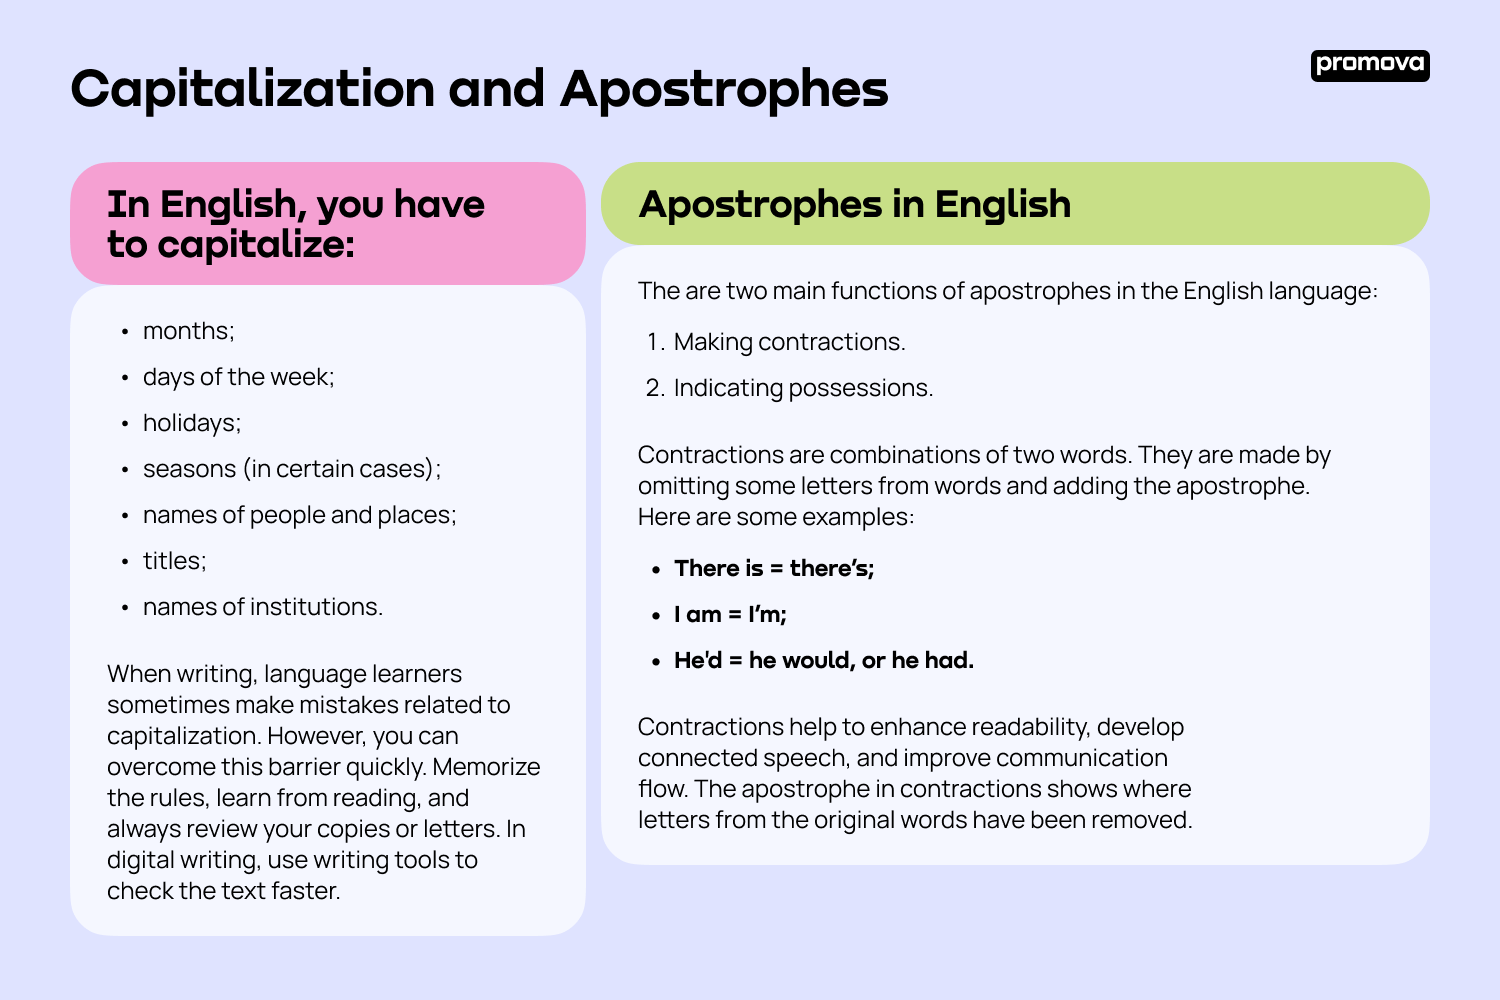 Explore Capitalization and Apostrophes in English